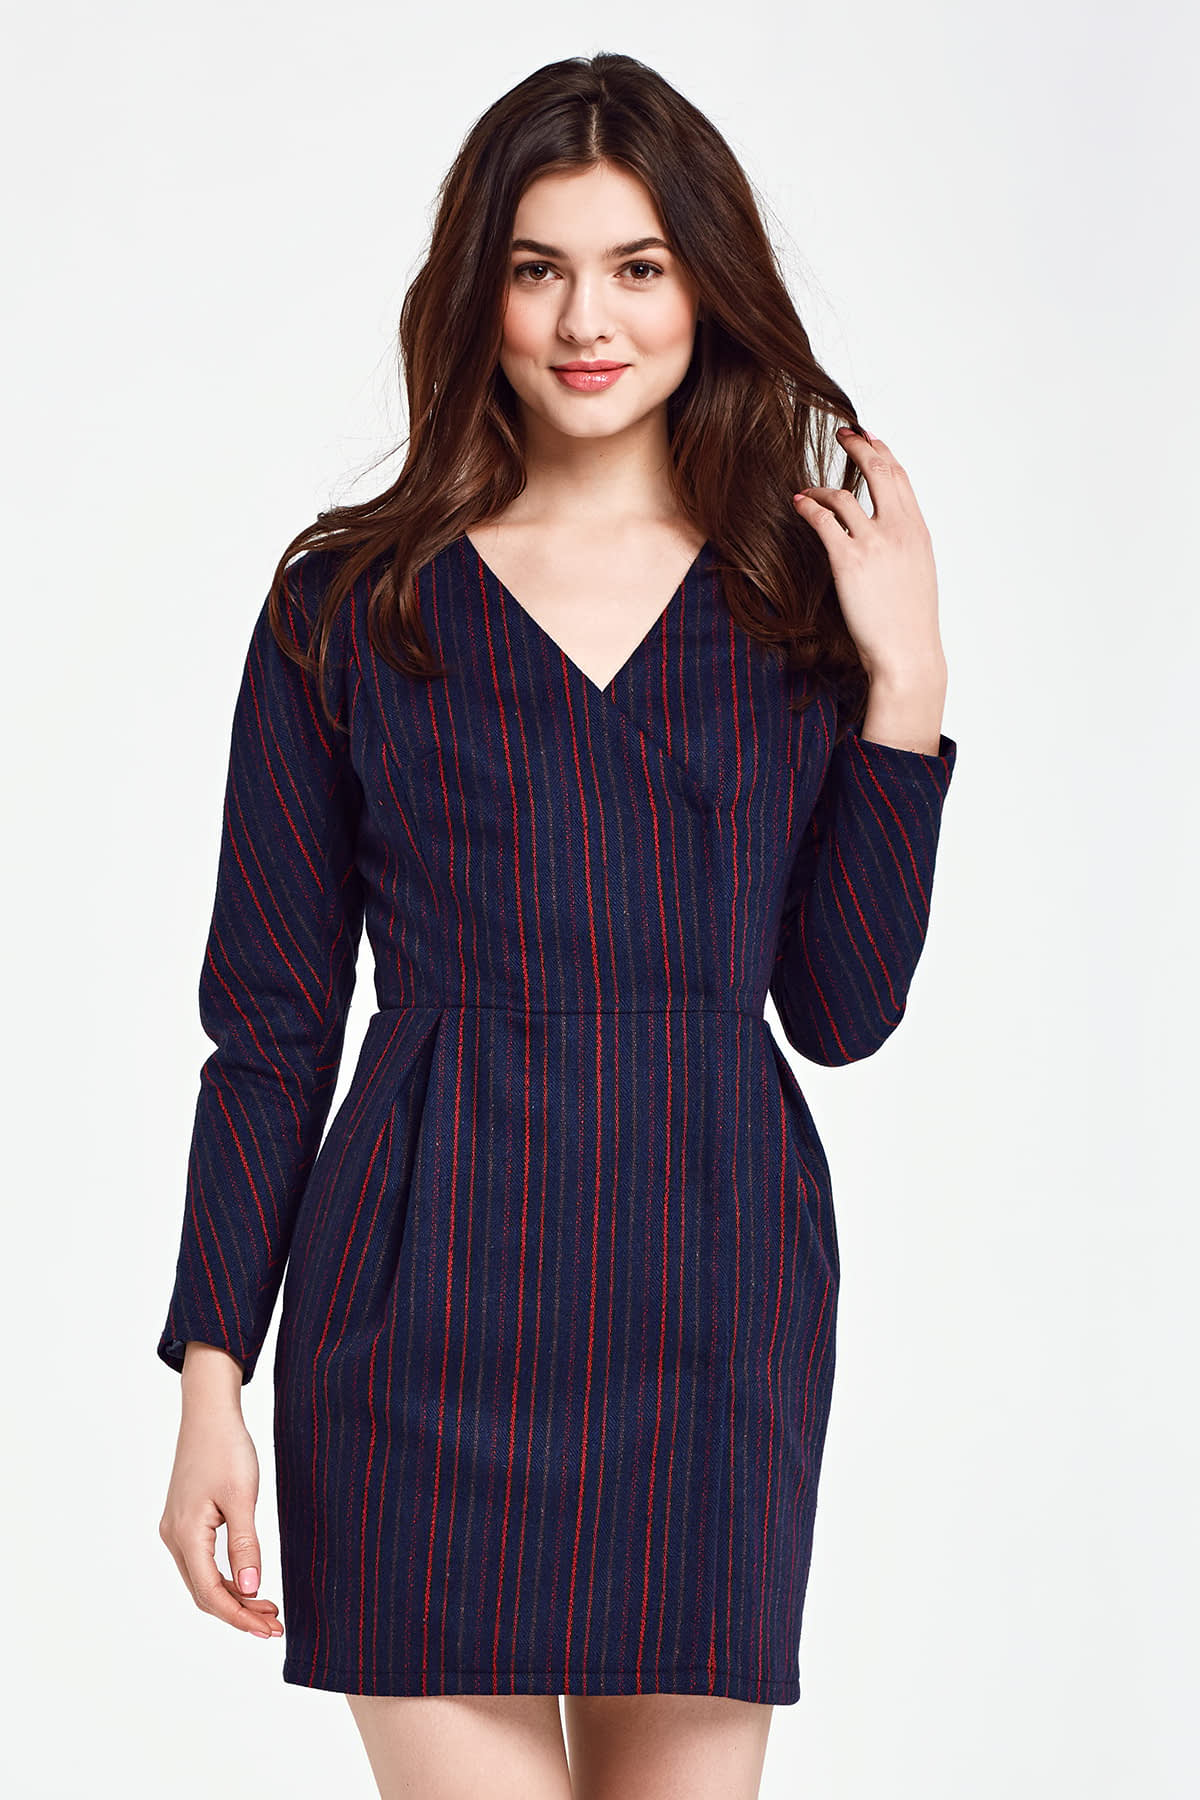 Blue dress with a wrap top and red stripes, photo 2